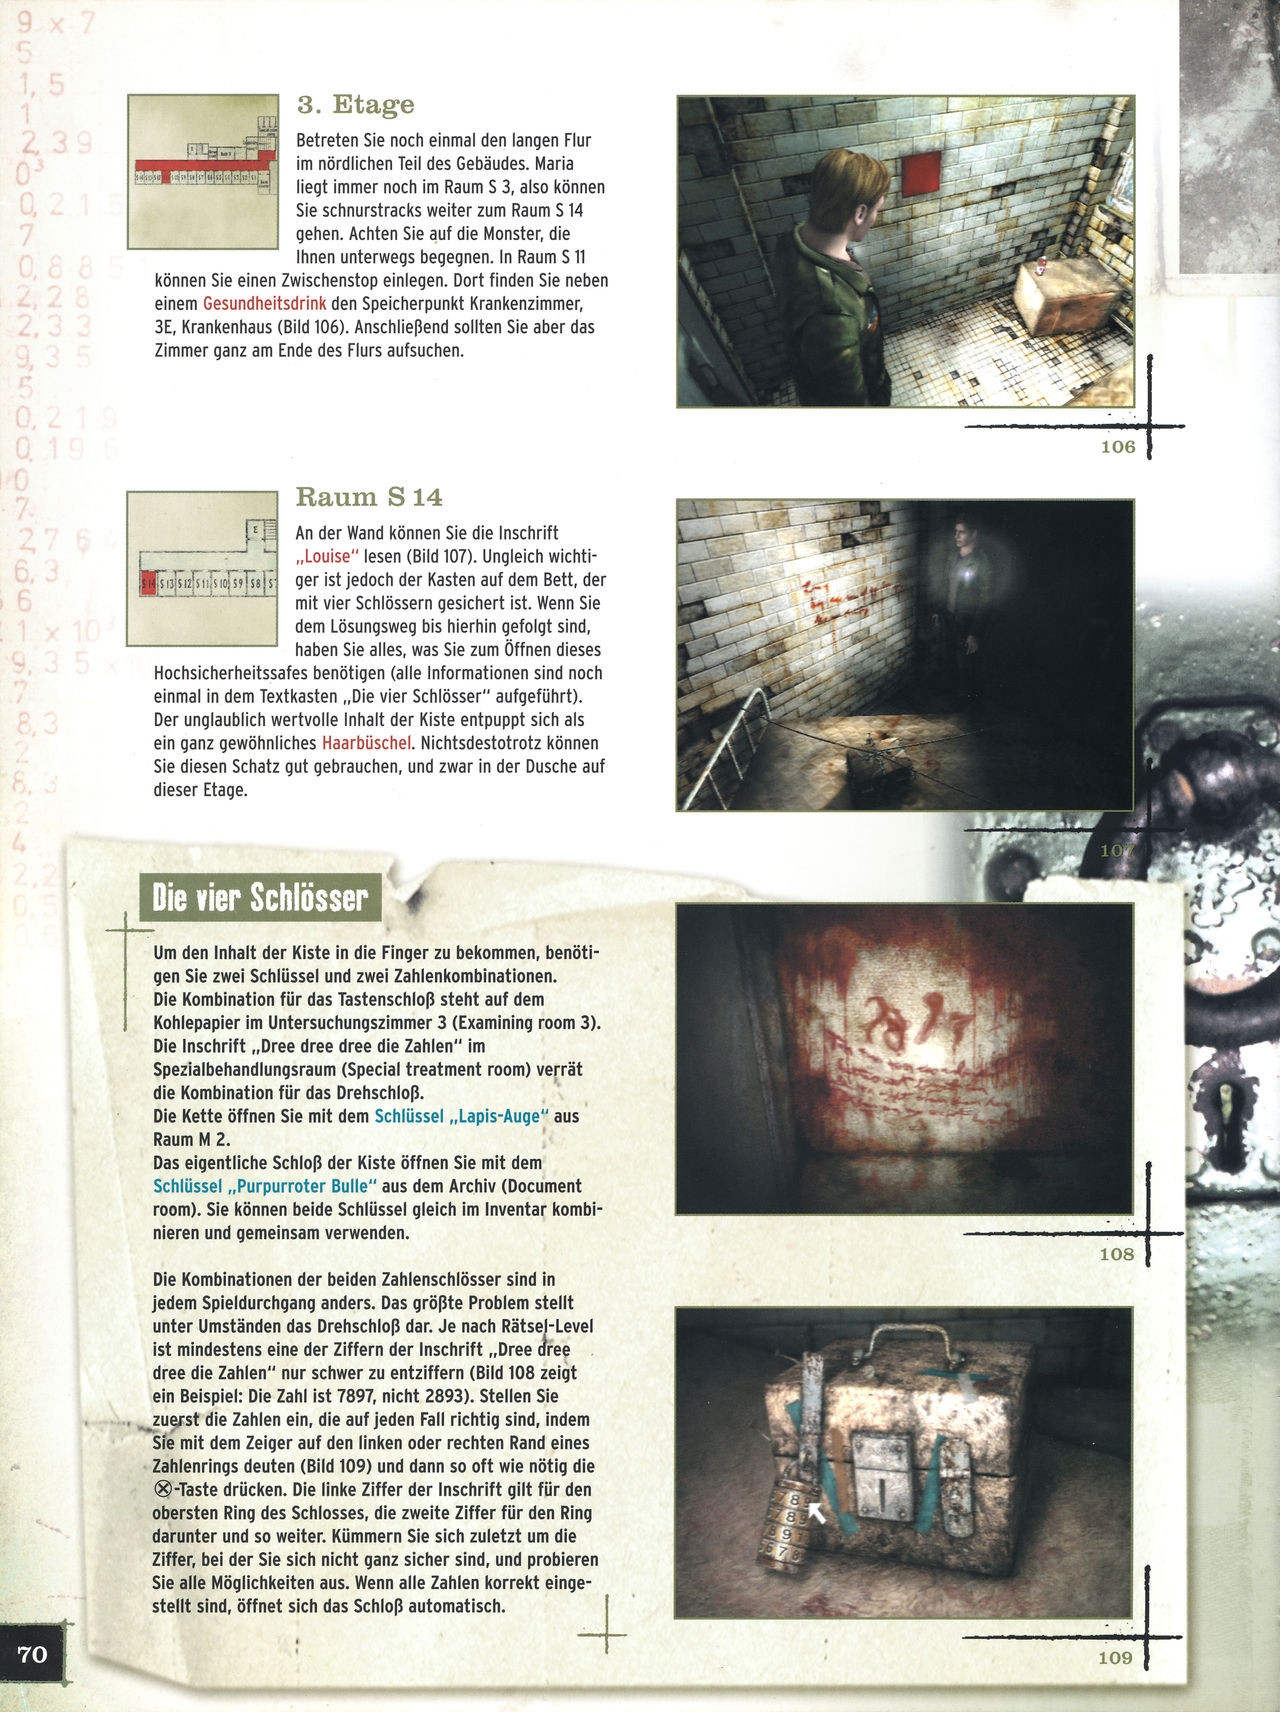 Silent Hill 2 Official Strategy Guide Authoritzed Collection 69